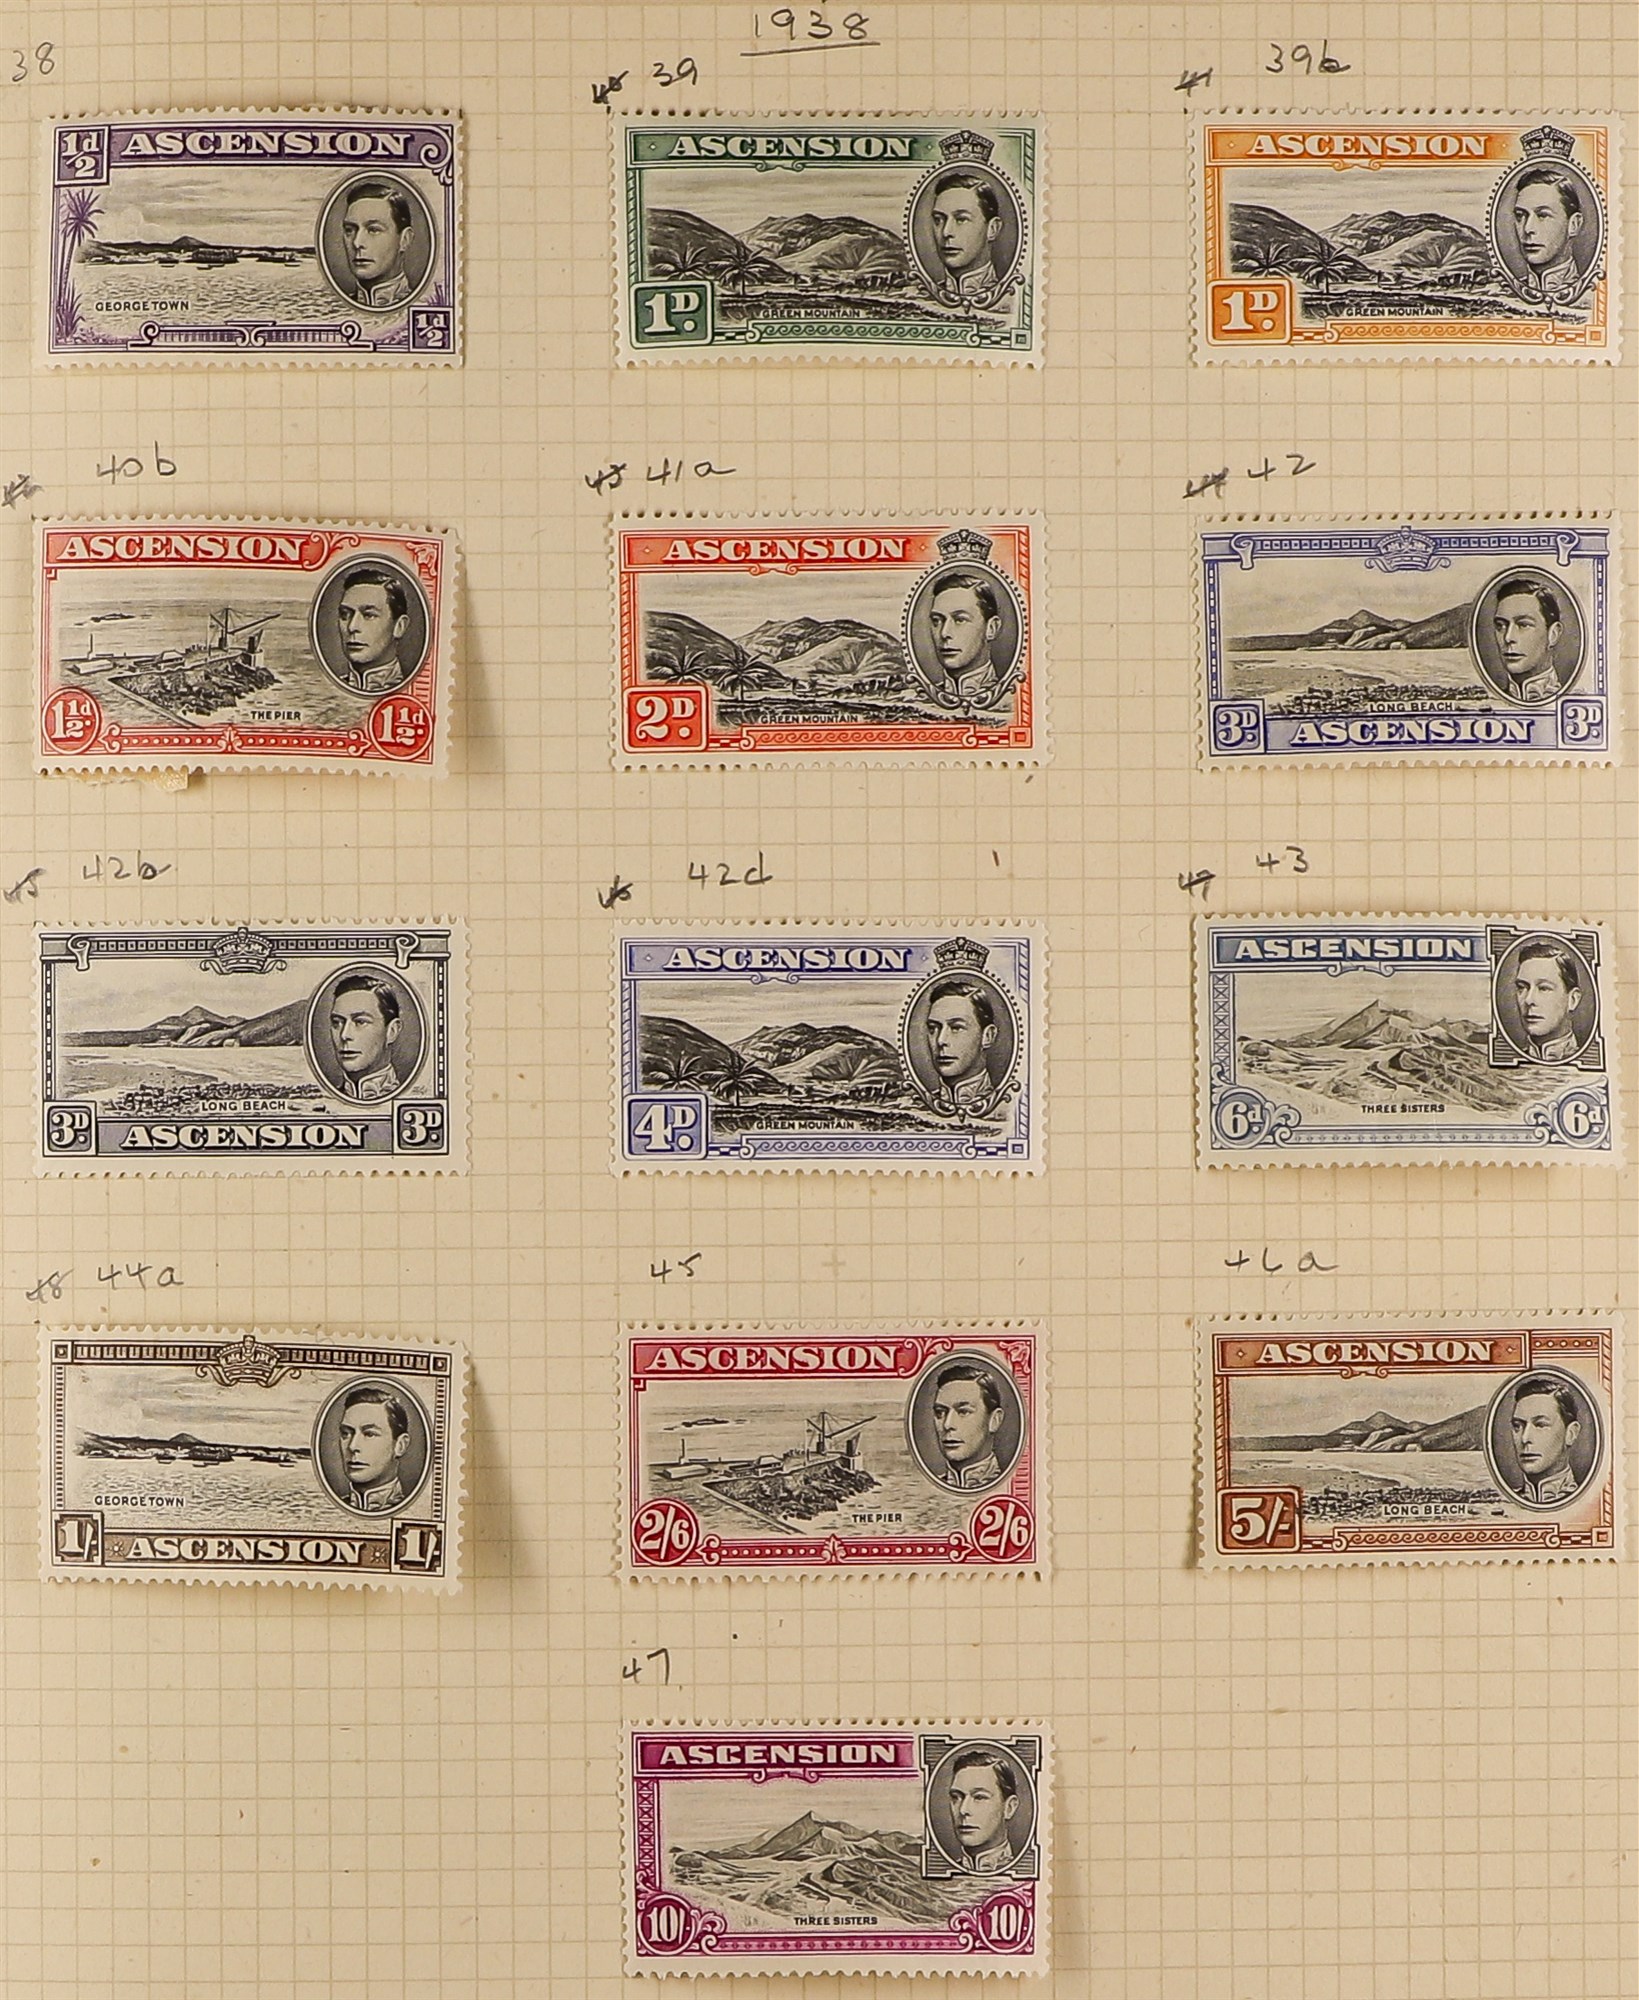 COLLECTIONS & ACCUMULATIONS BRITISH COMMONWEALTH - AMERICAS & CARIBBEAN ISLANDS 1850's-1960's mint & - Image 3 of 24